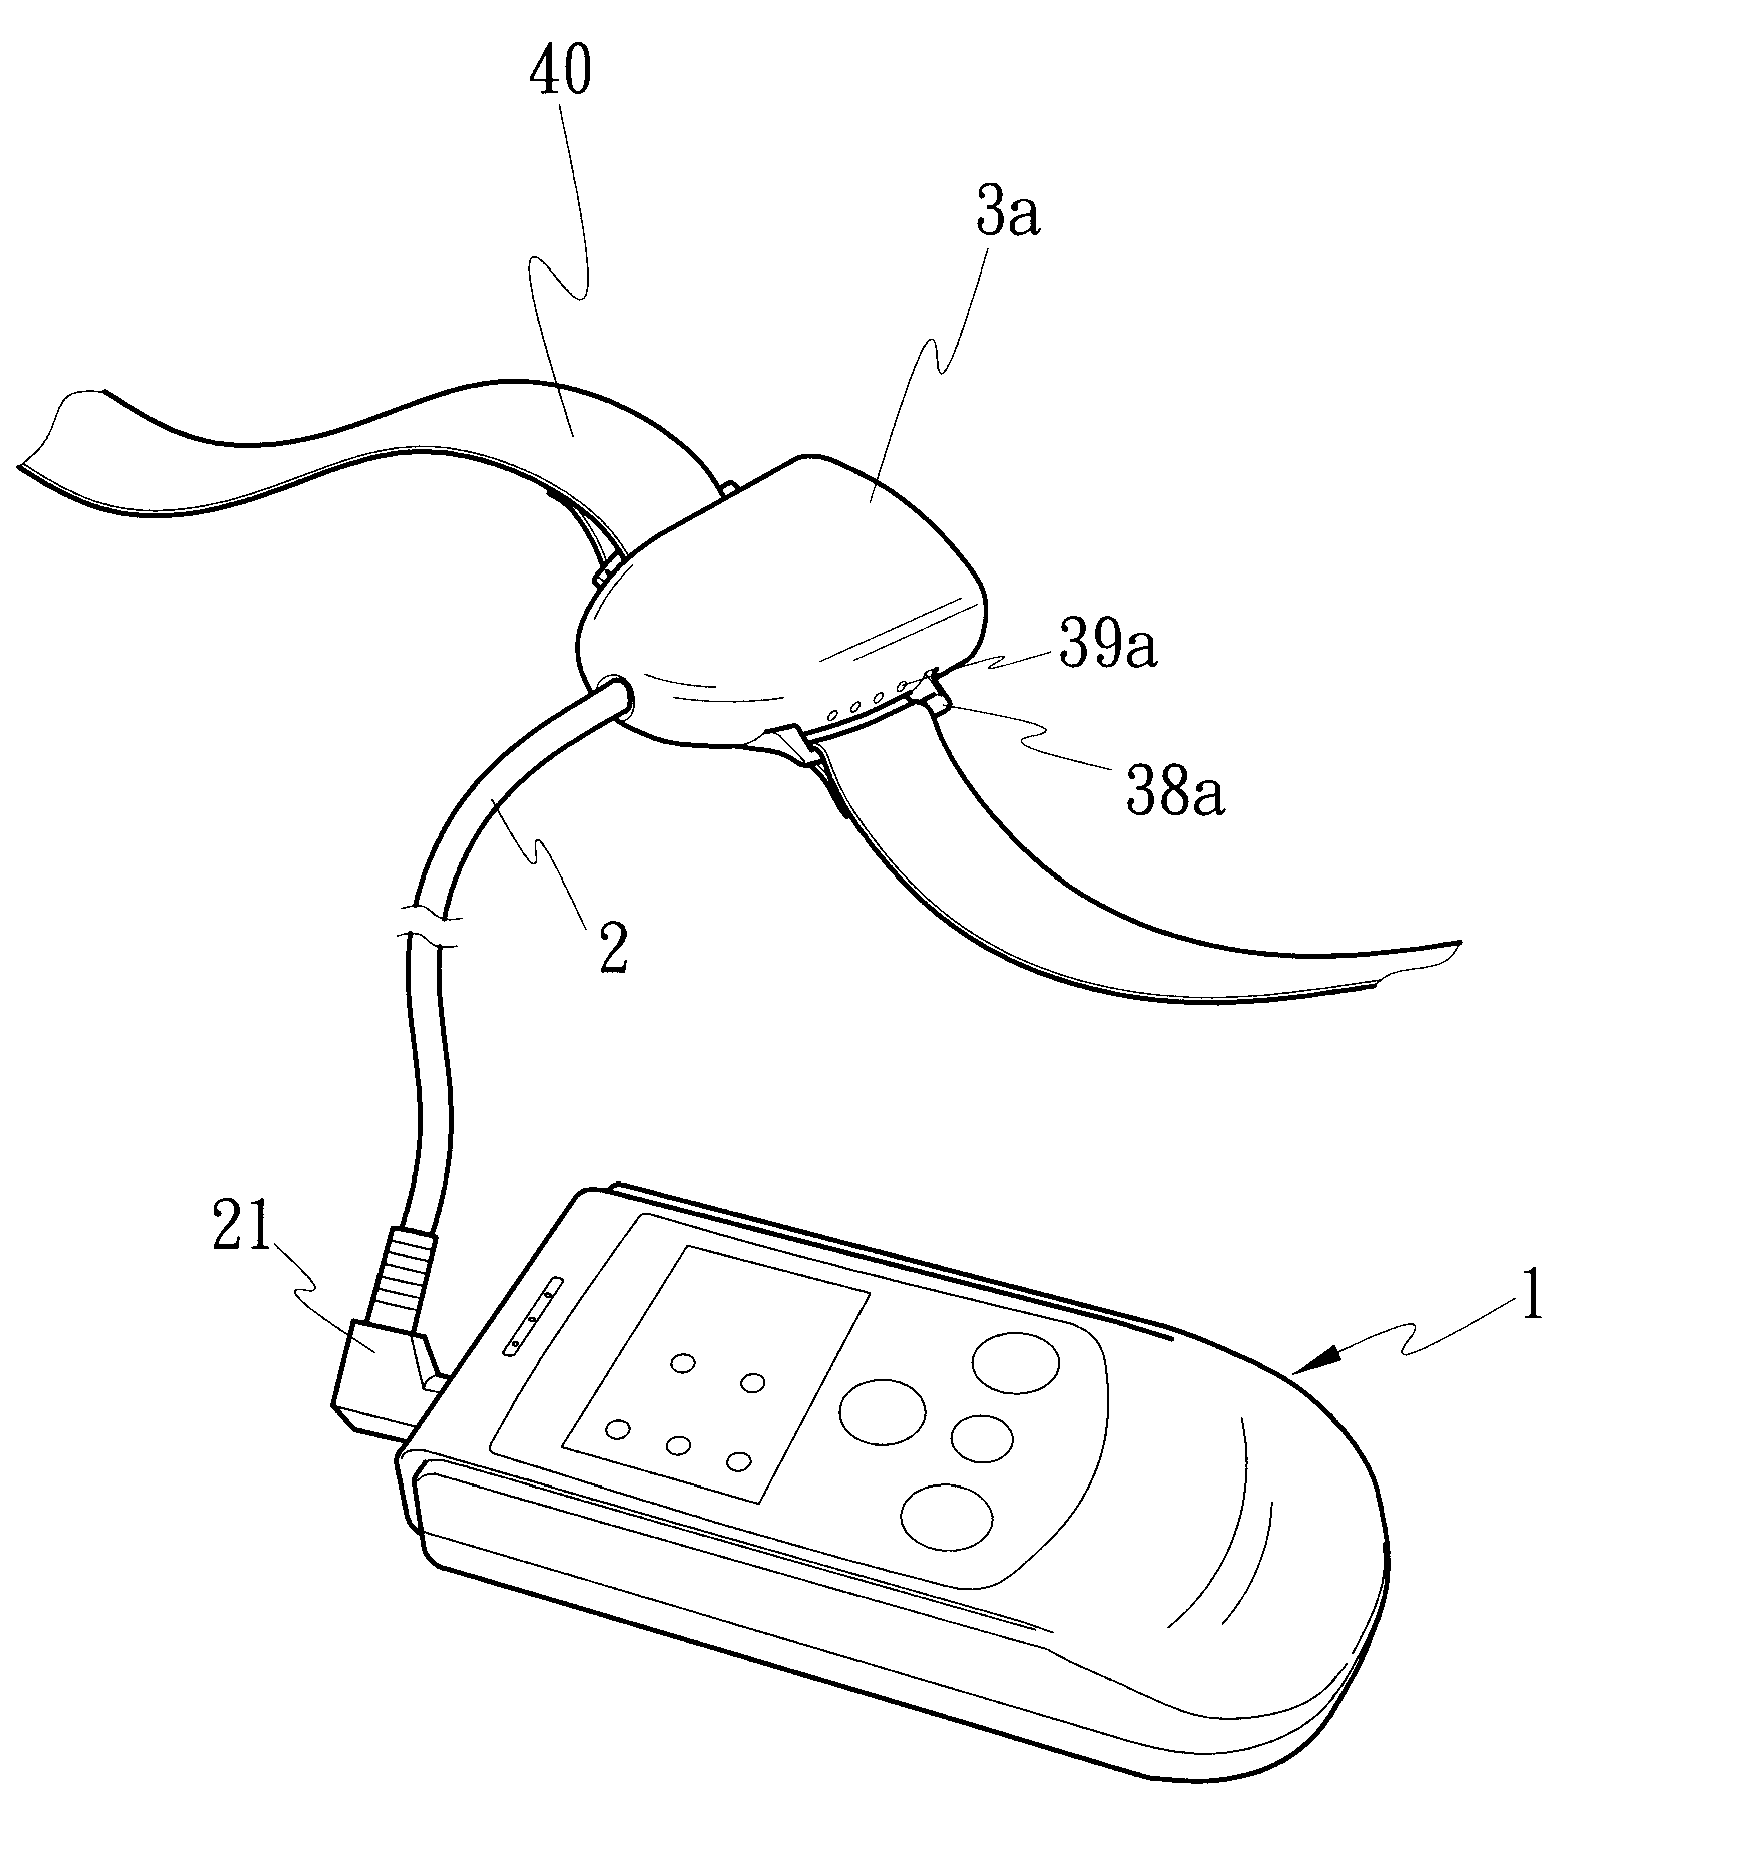 Laser activator for physical treatment